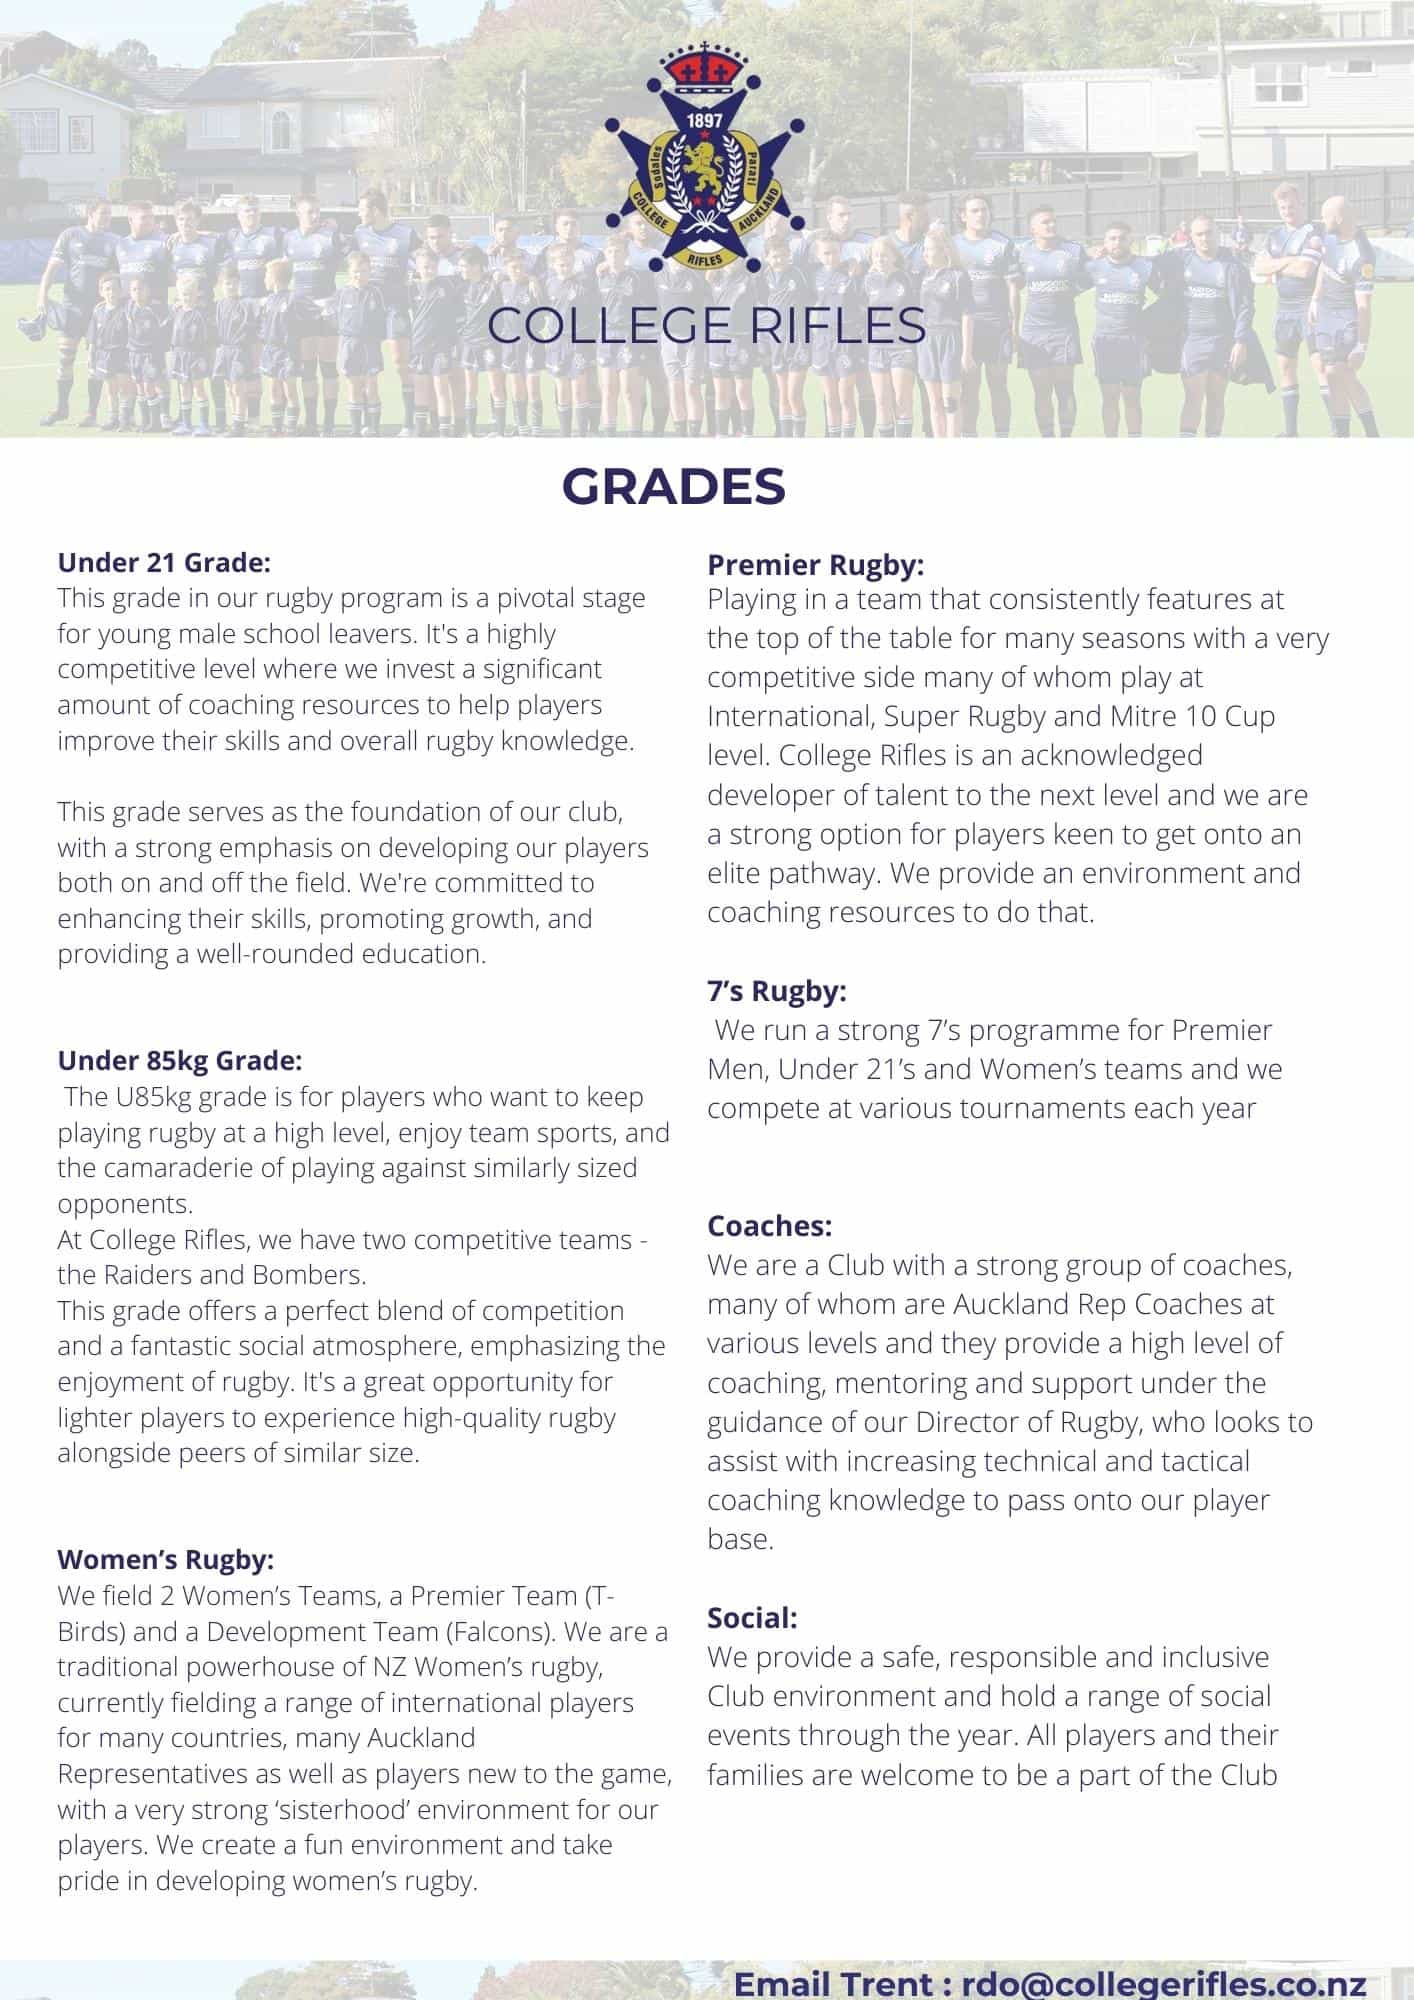 ABOUT US: College Rifles is based in Remuera, Auckland. We are a club with a strong sense of tradition but have moved with the times to provide an inclusive, safe and fun environment for our players and supporters. We are a very competitive and ambitious - 2